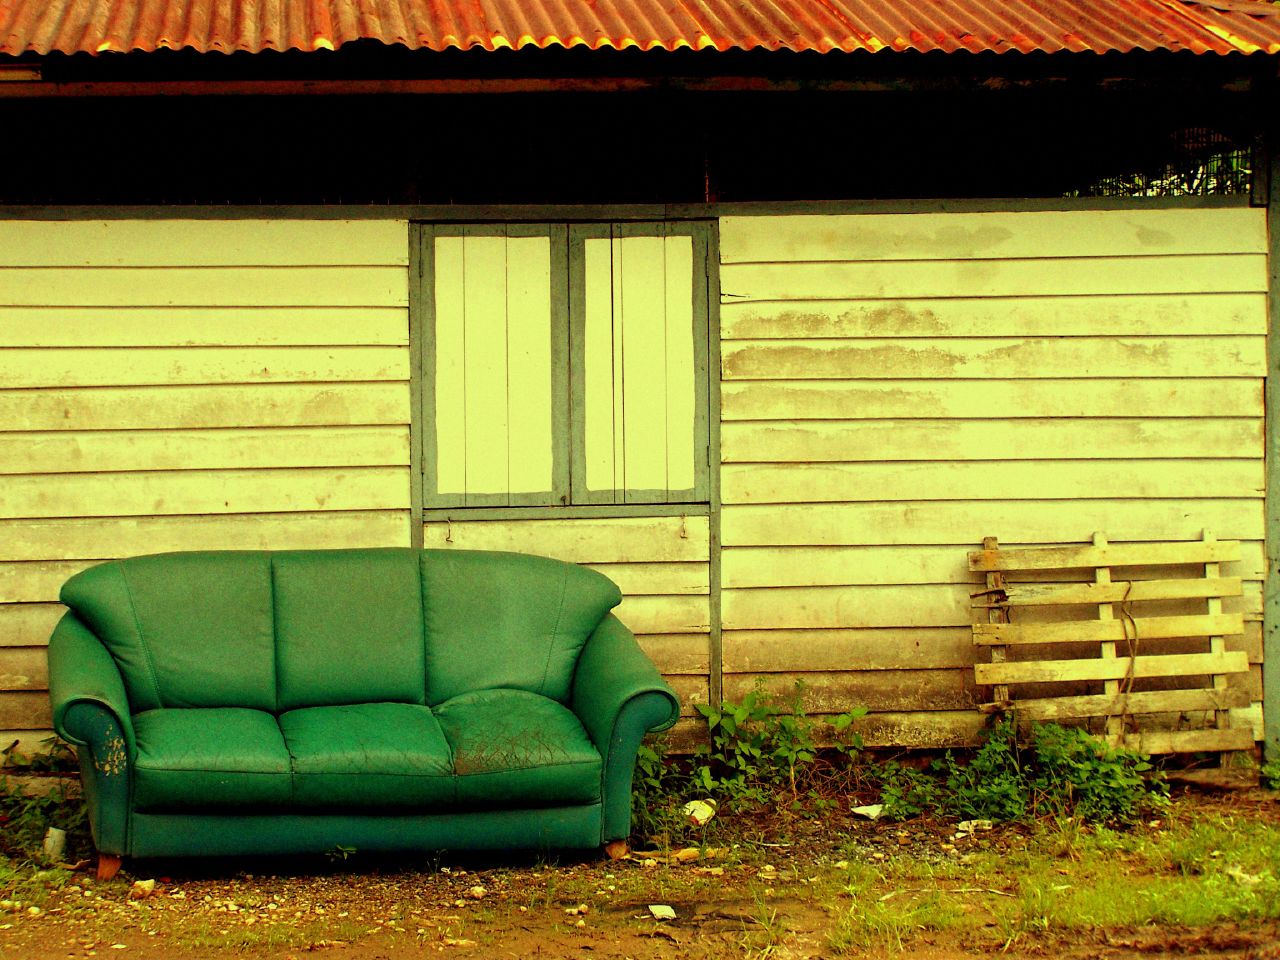 the house has an old green couch in front